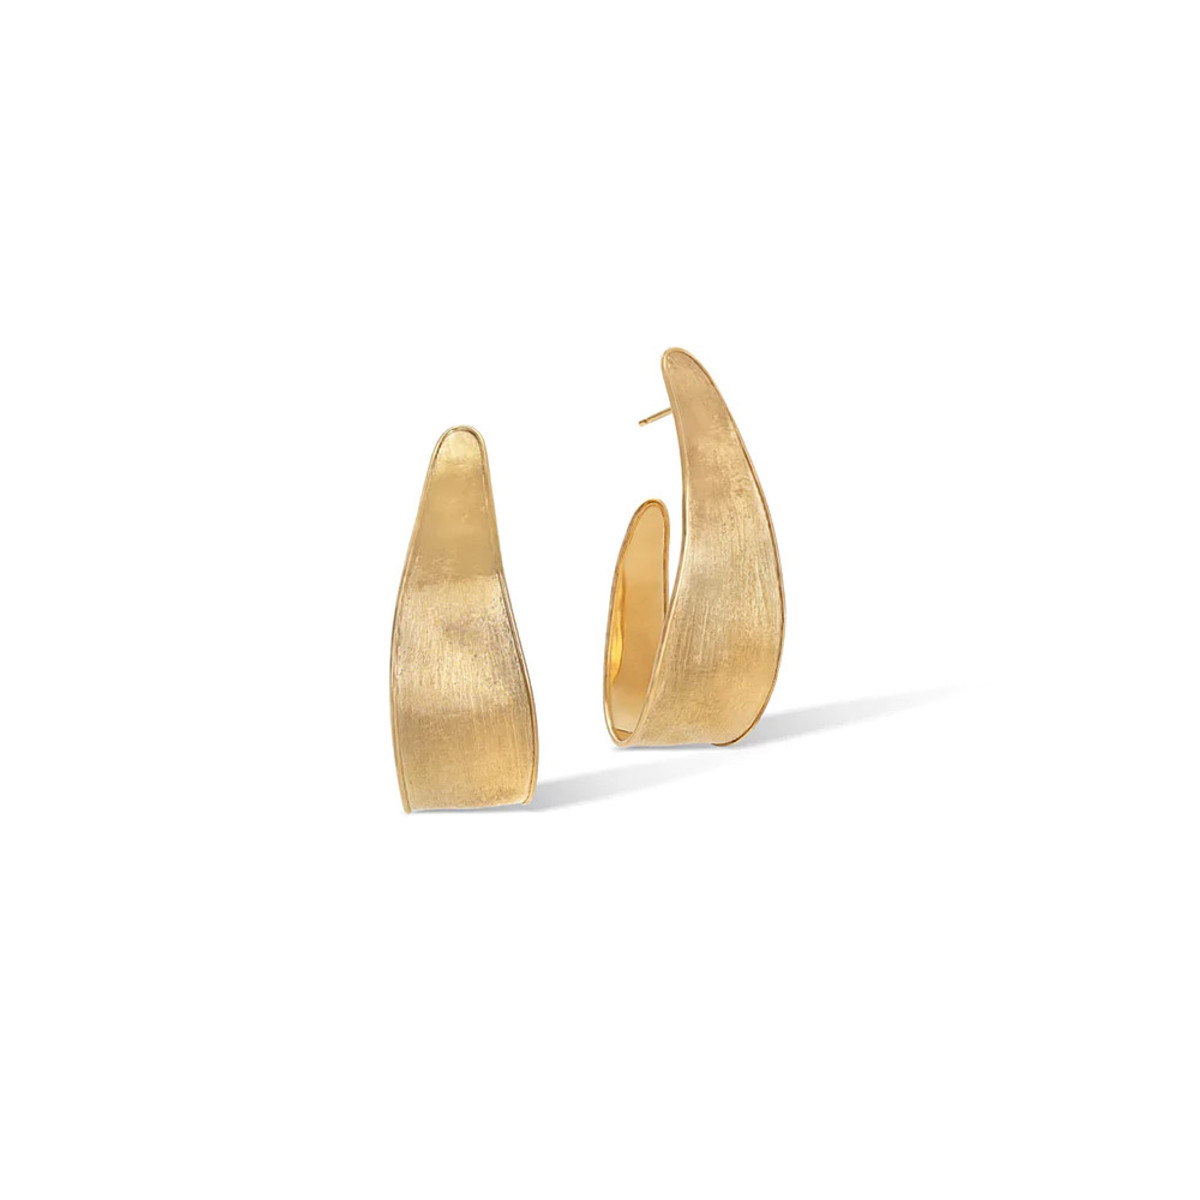 Marco Bicego Lunaria Collection 18K Yellow Gold Small Hoop Earrings-44672 Product Image